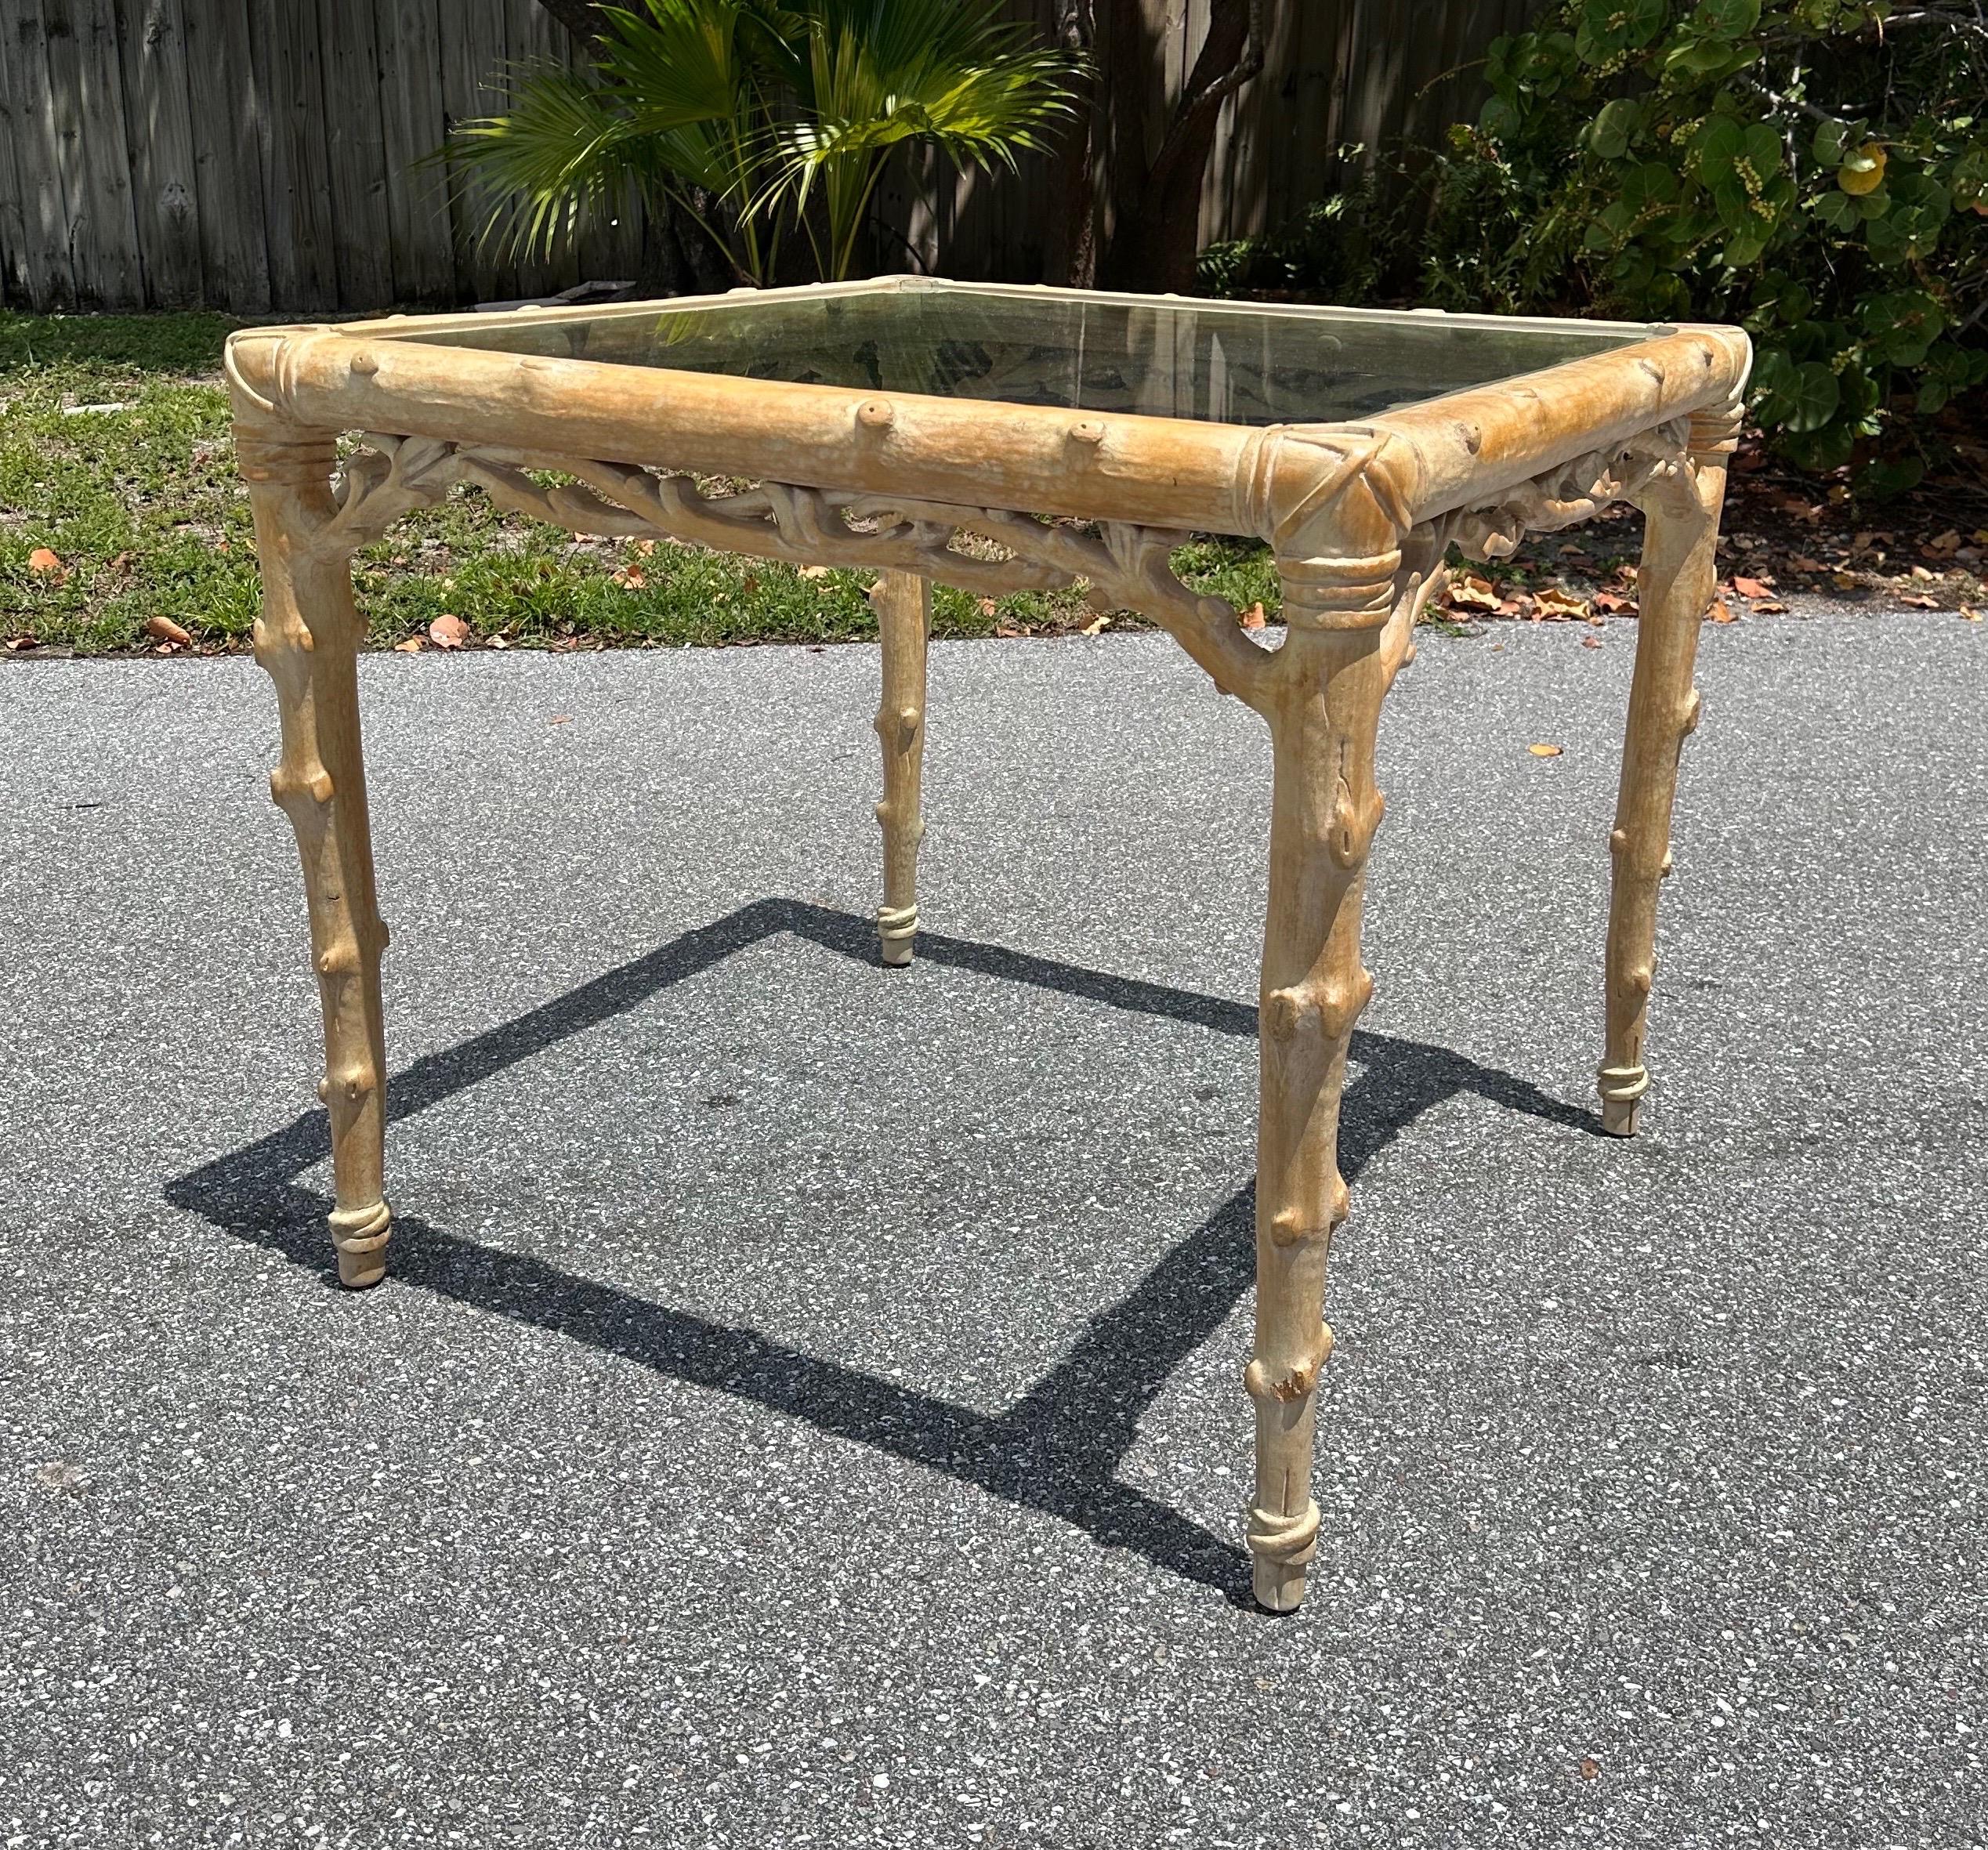 Rare faux twig glass top game table made by McGuire part of the Nancy Reagan Architectural Digest collection. Very well made detailed carved wood. Inset glass. This faux bois style is very versatile and can be paired with many different types of